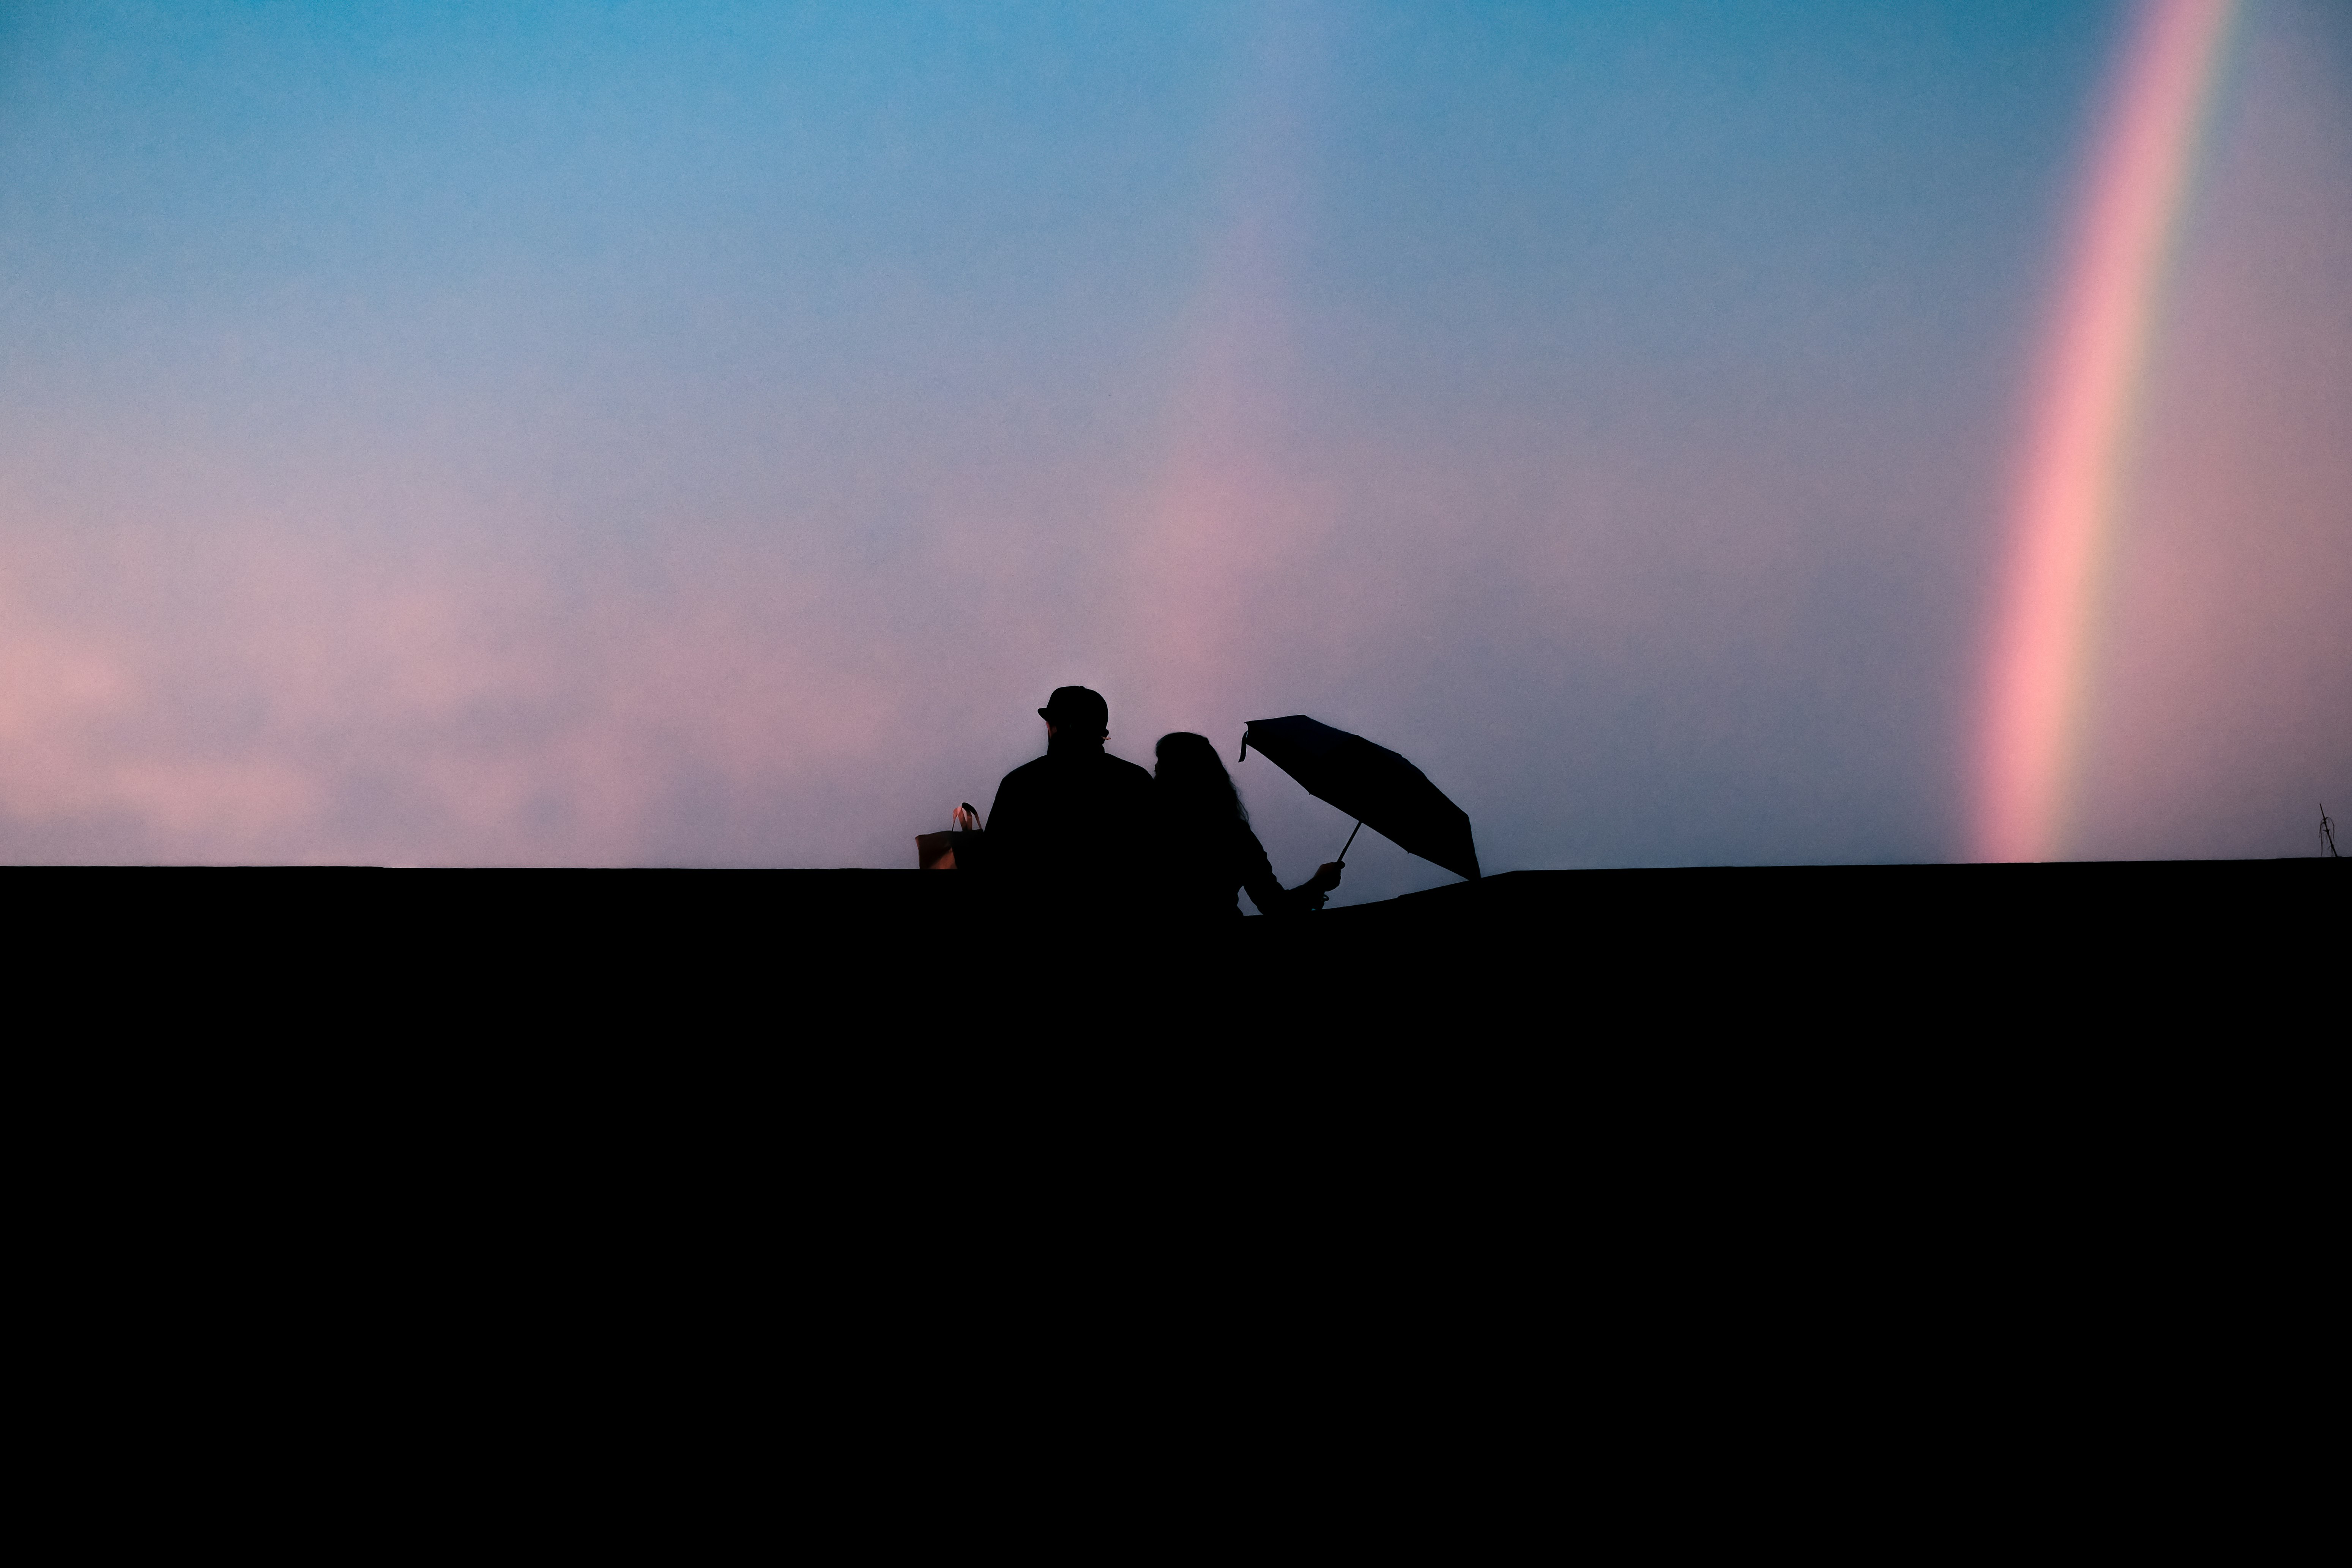 silhouette of man and woman sitting on bench under blue sky during daytime